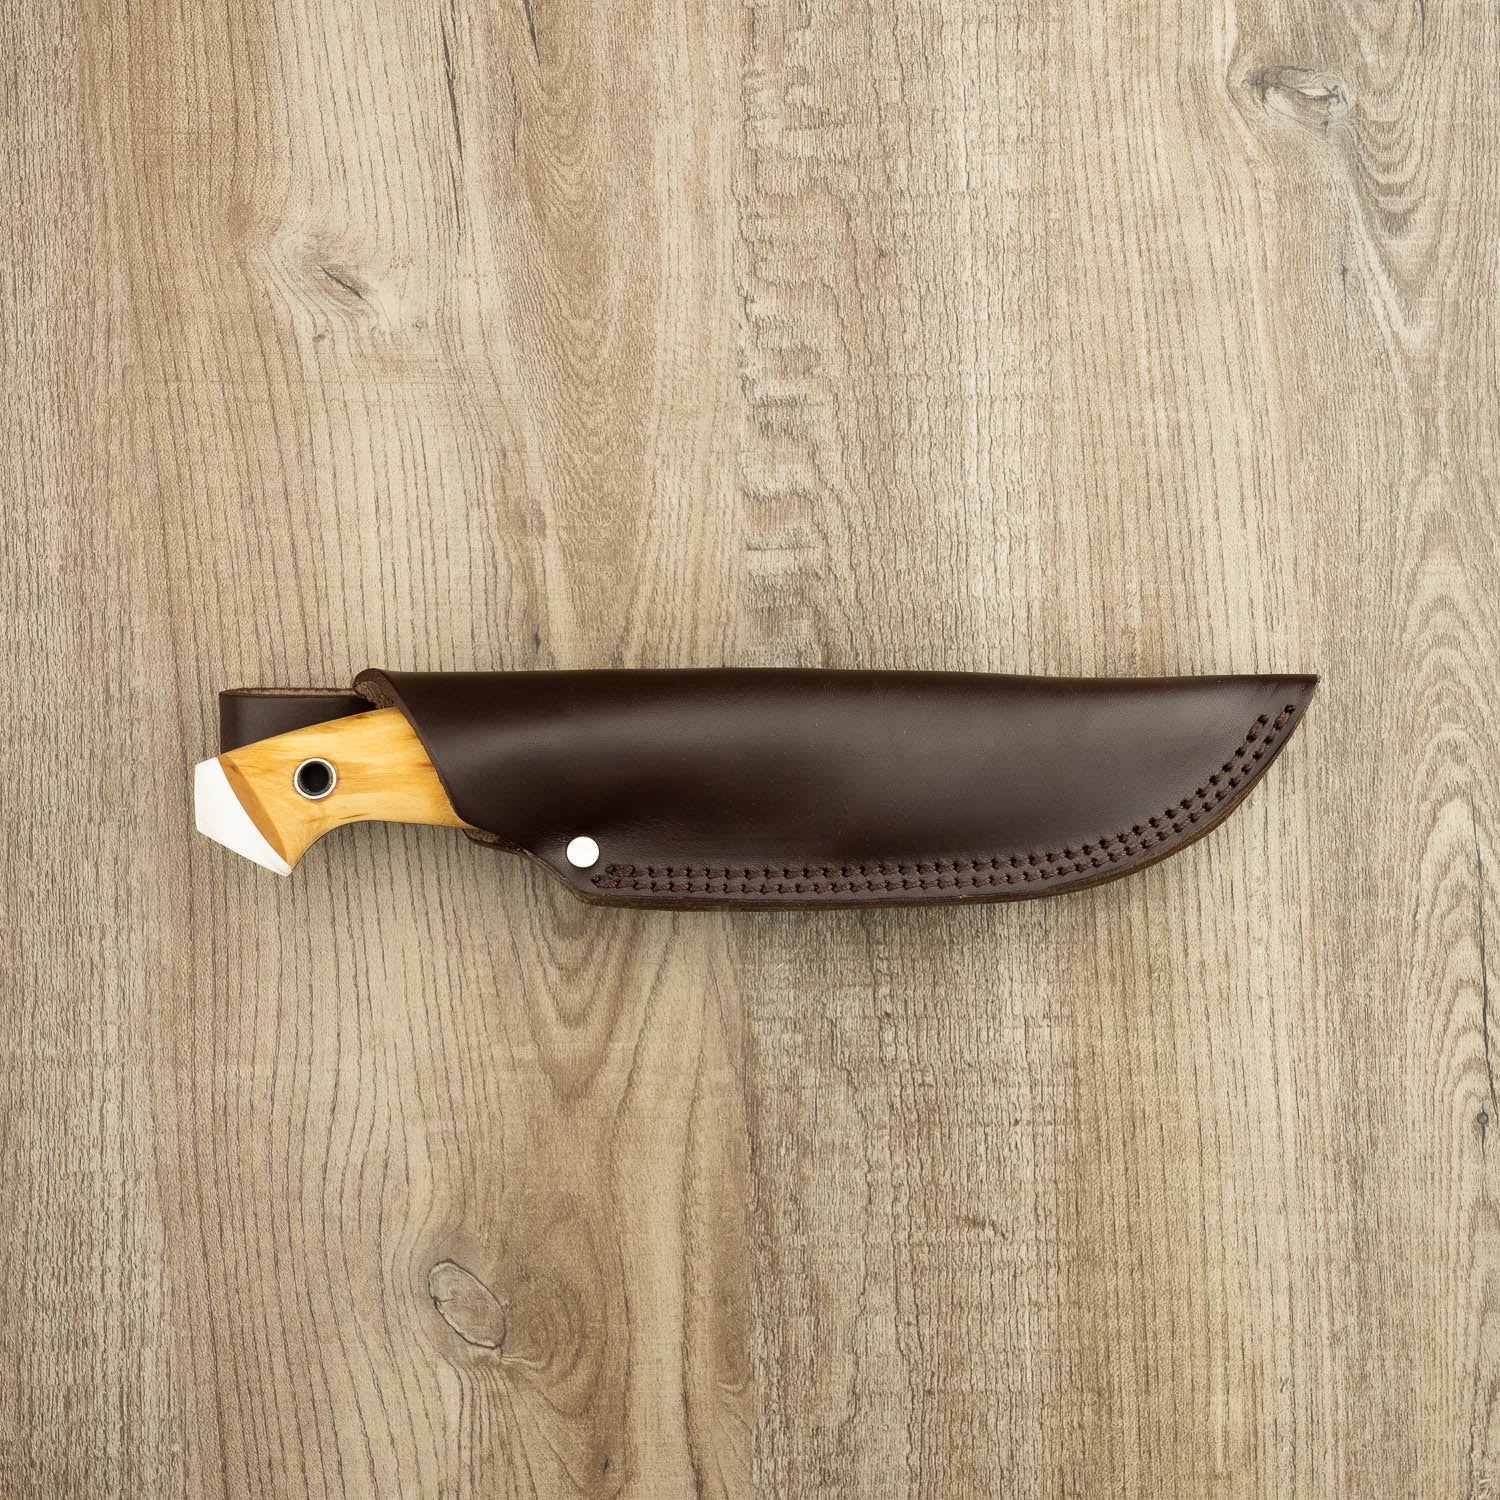 Helle Knives - Are you going to sort through your knife collection